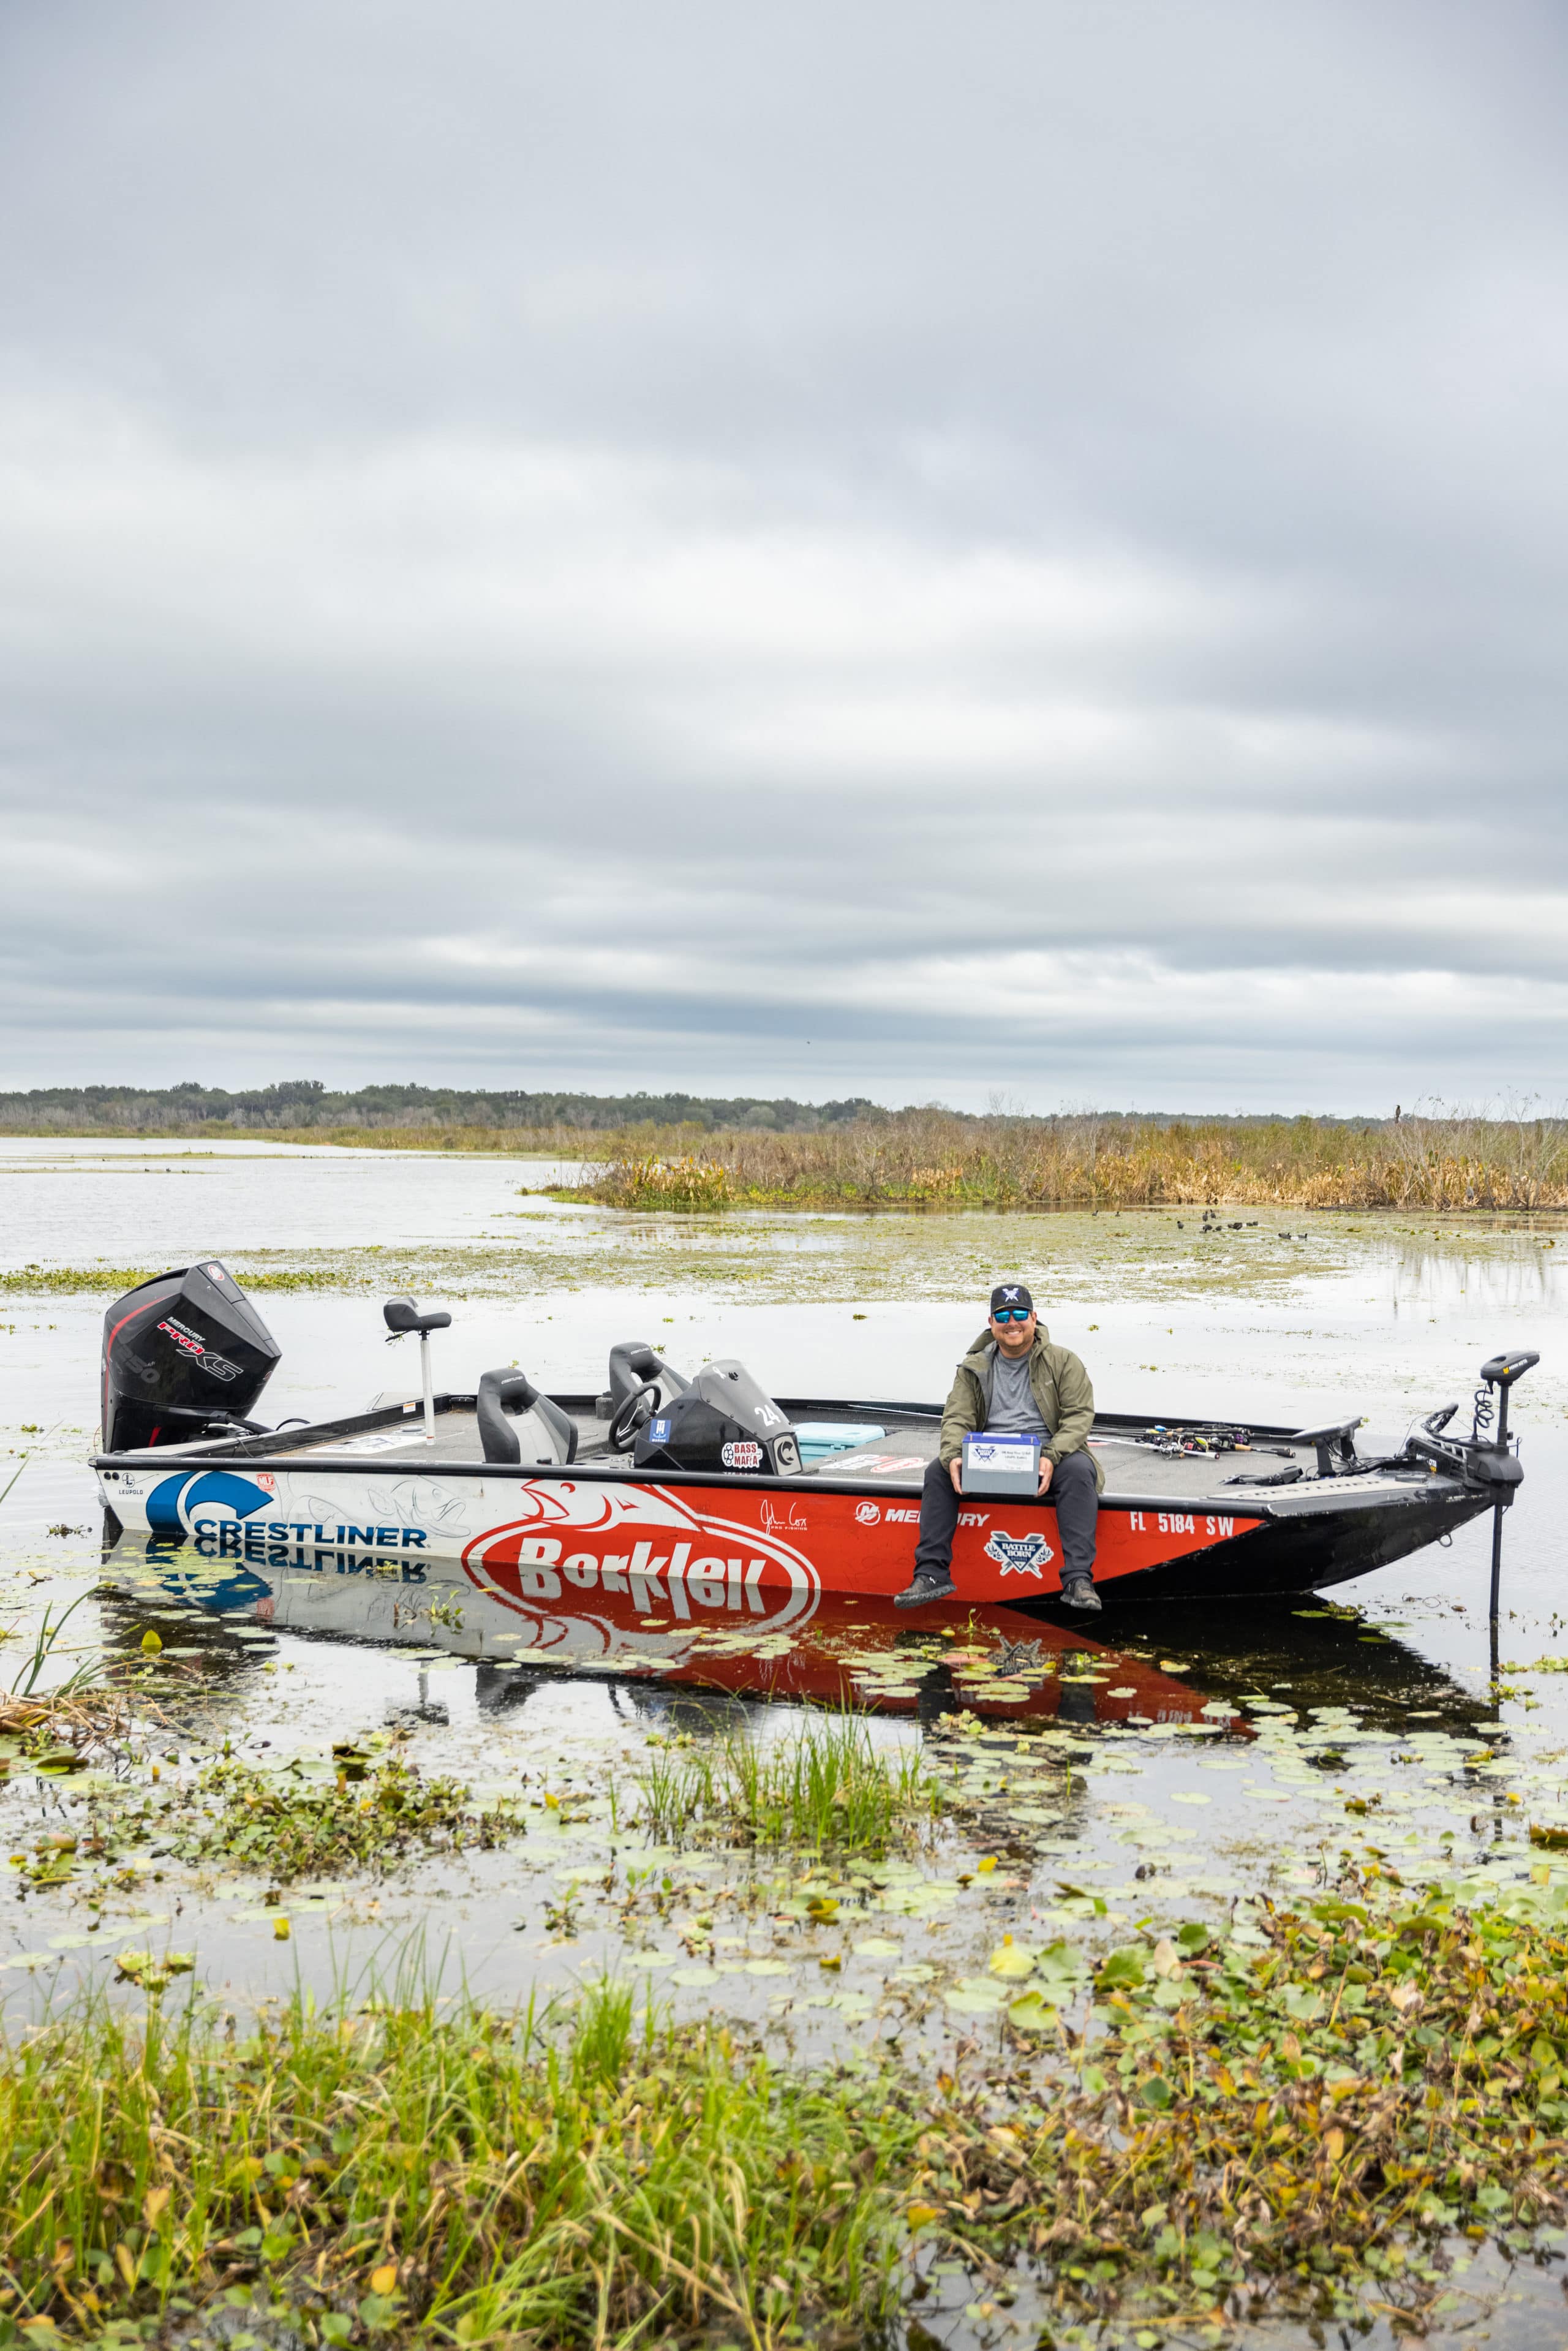 Professional Angler John Cox Fishing On His Bass Boat Holding a Battle Born Battery